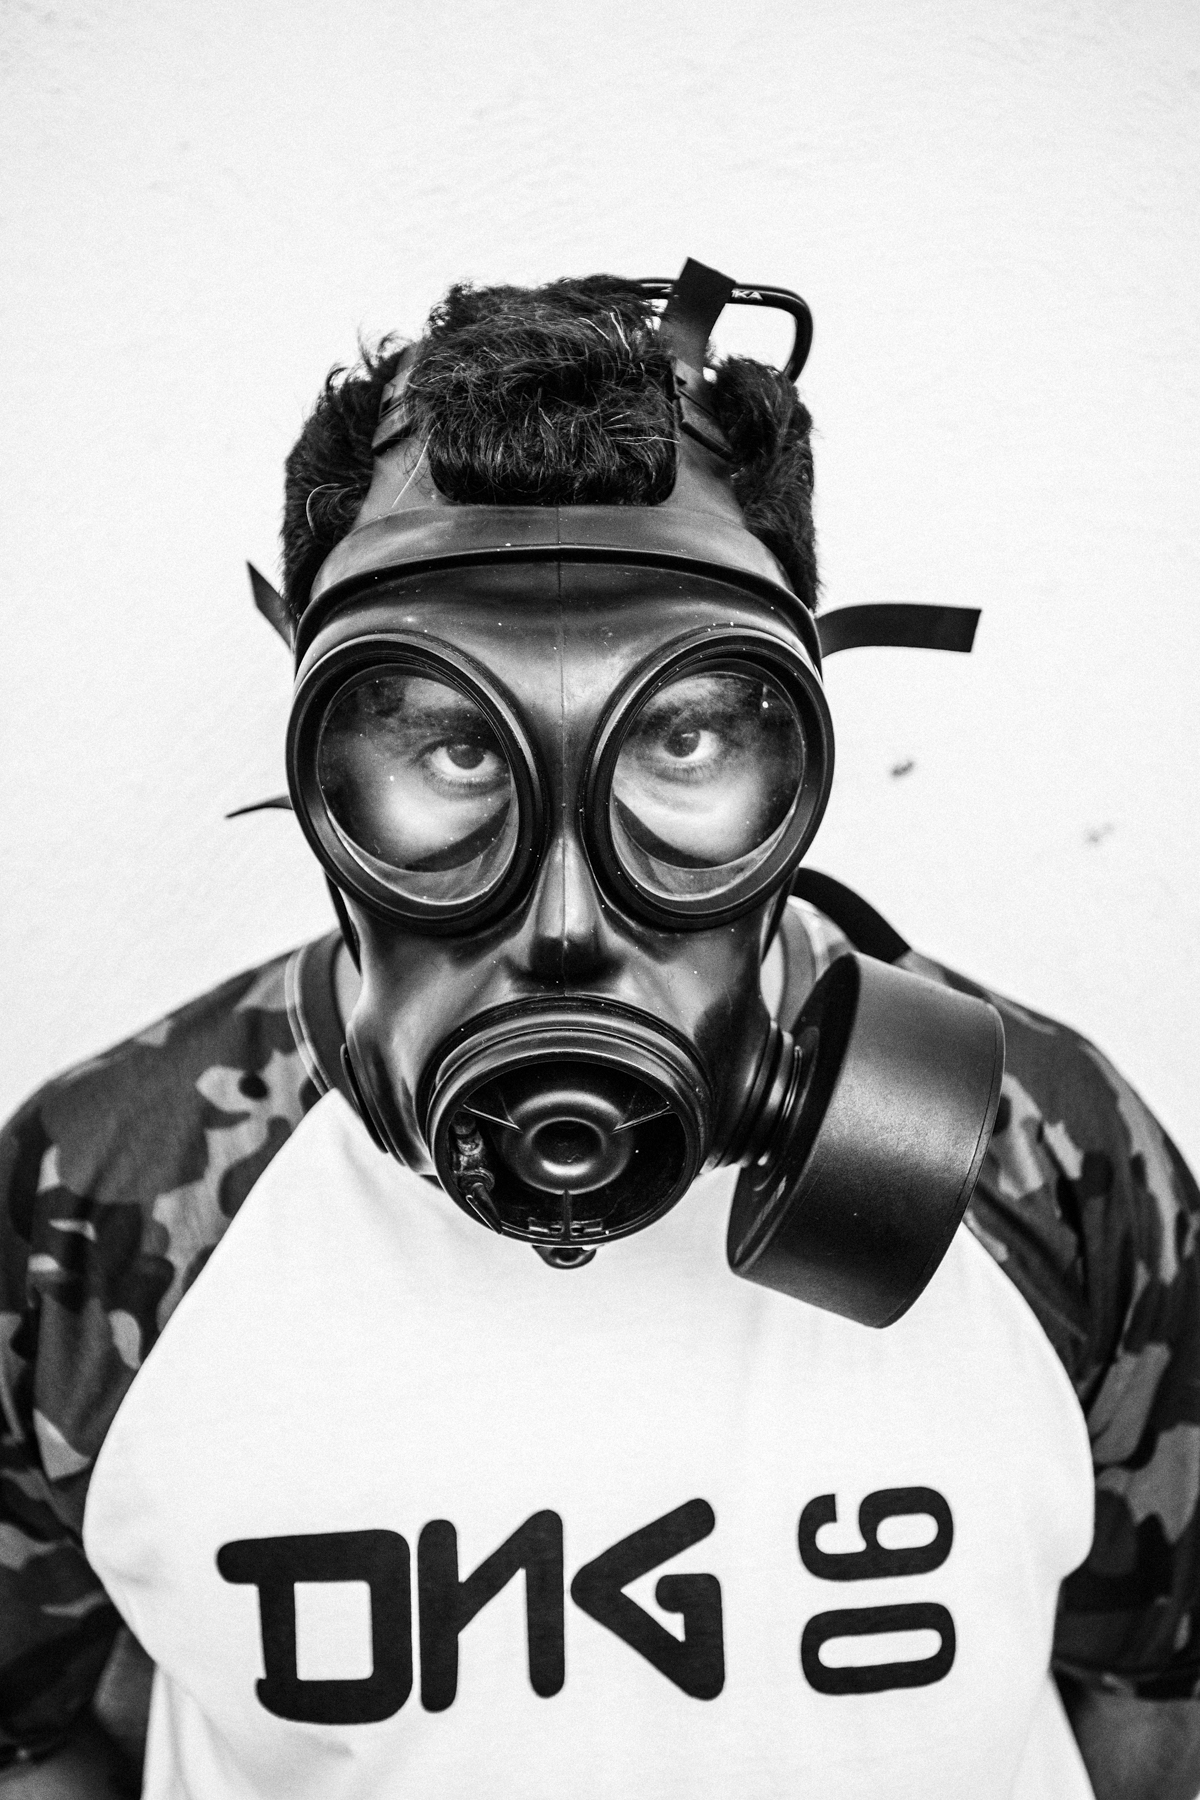  February 2015 - Rio de Janeiro, Brazil: Raul, one of the members of Papo Reto collective, posing with a gas mask 